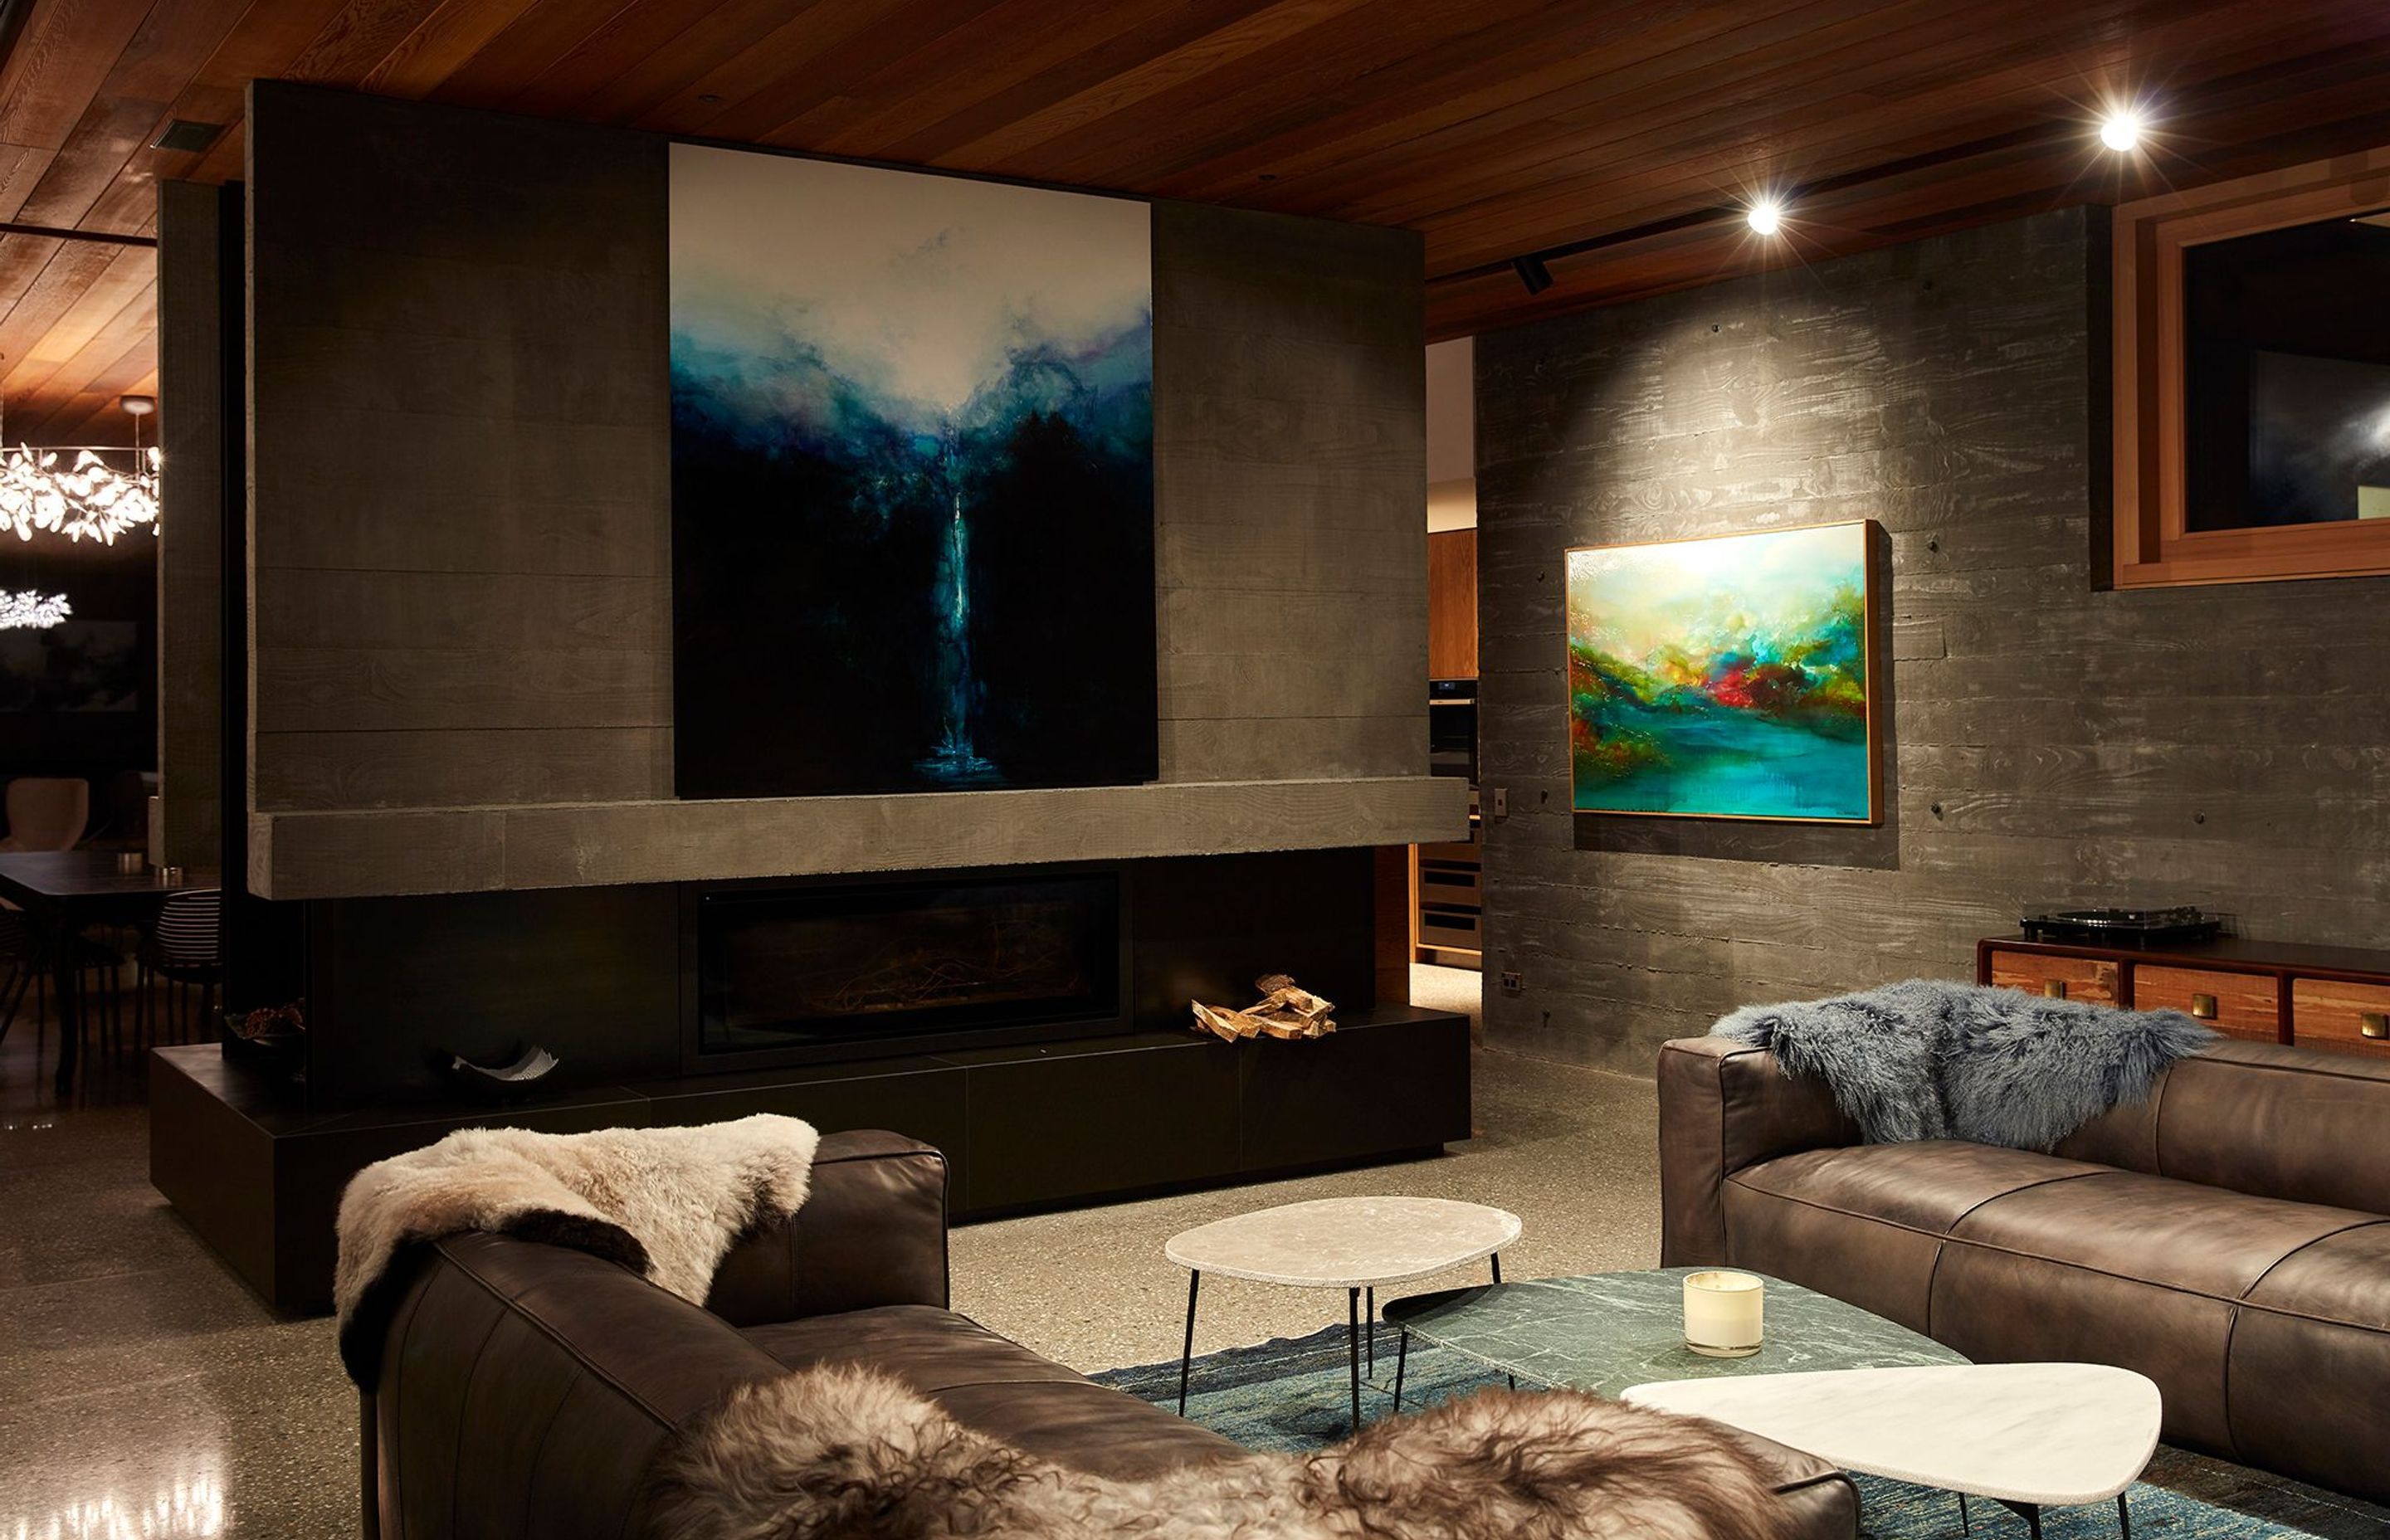 The divider becomes a focal point to feature art and a fireplace.